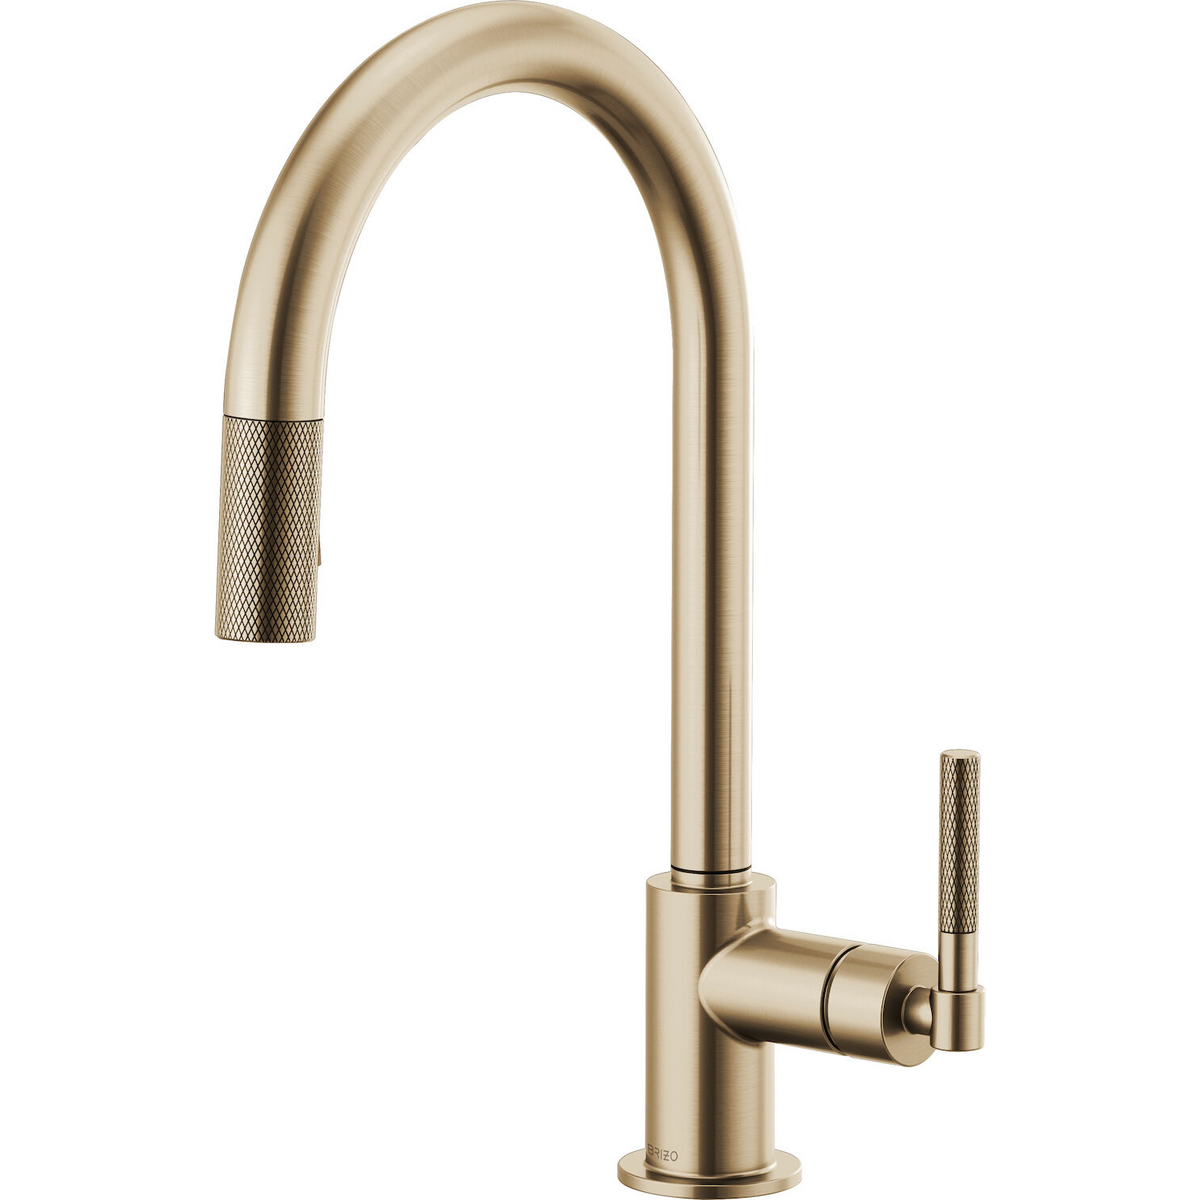 LITZE PULL-DOWN FAUCET WITH ARC SPOUT AND KNURLED HANDLE